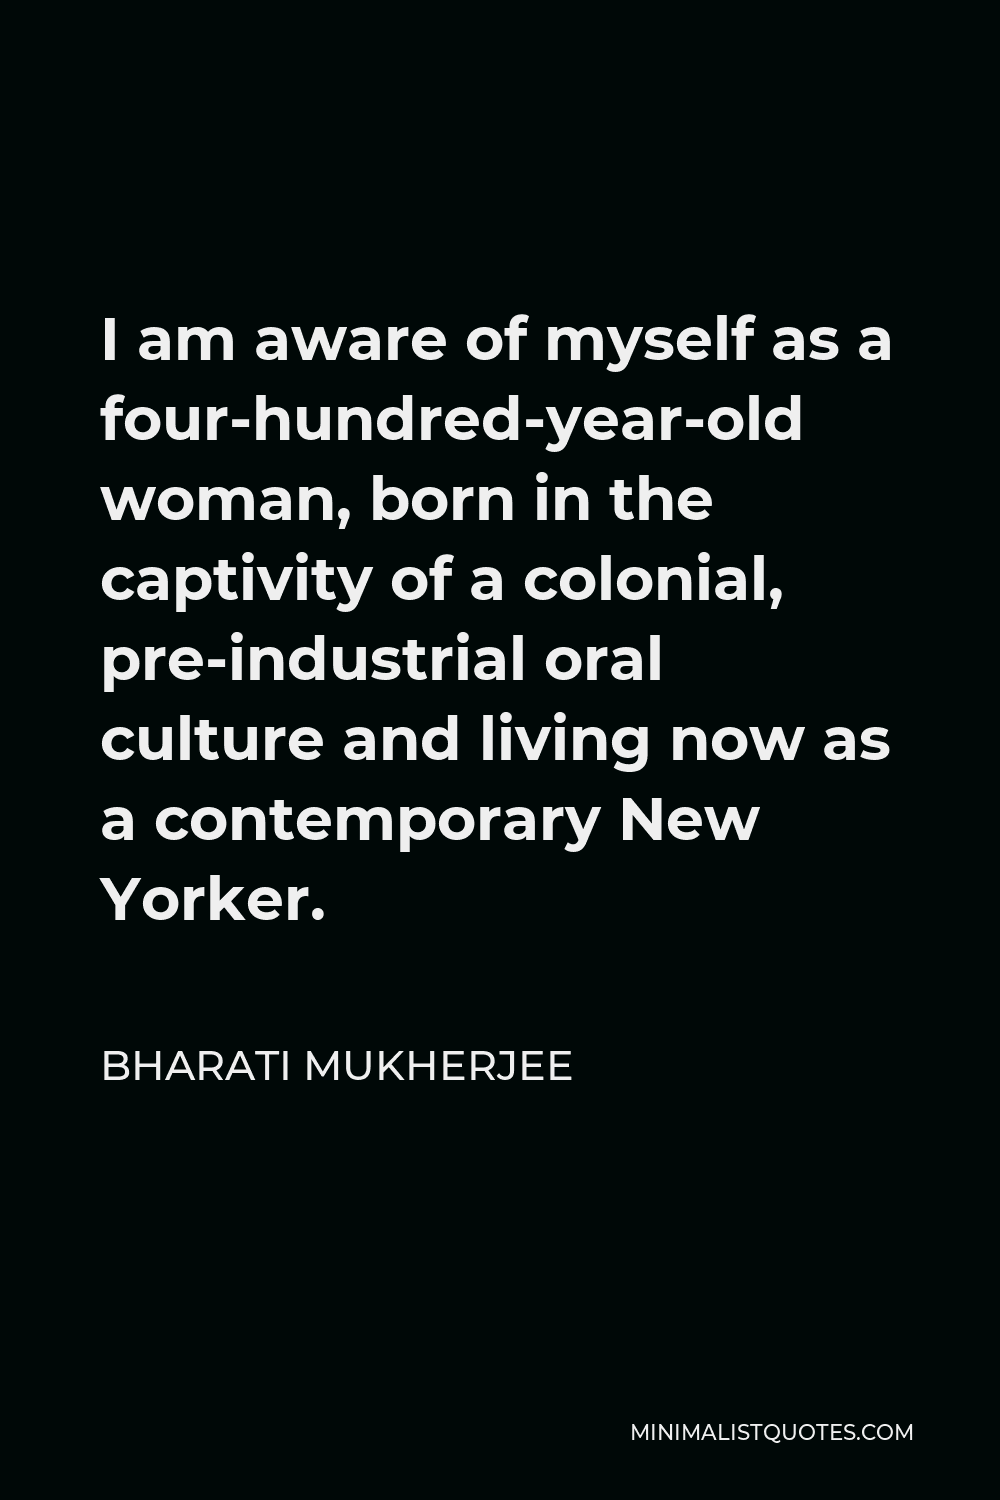 Bharati Mukherjee Quote - I am aware of myself as a four-hundred-year-old woman, born in the captivity of a colonial, pre-industrial oral culture and living now as a contemporary New Yorker.